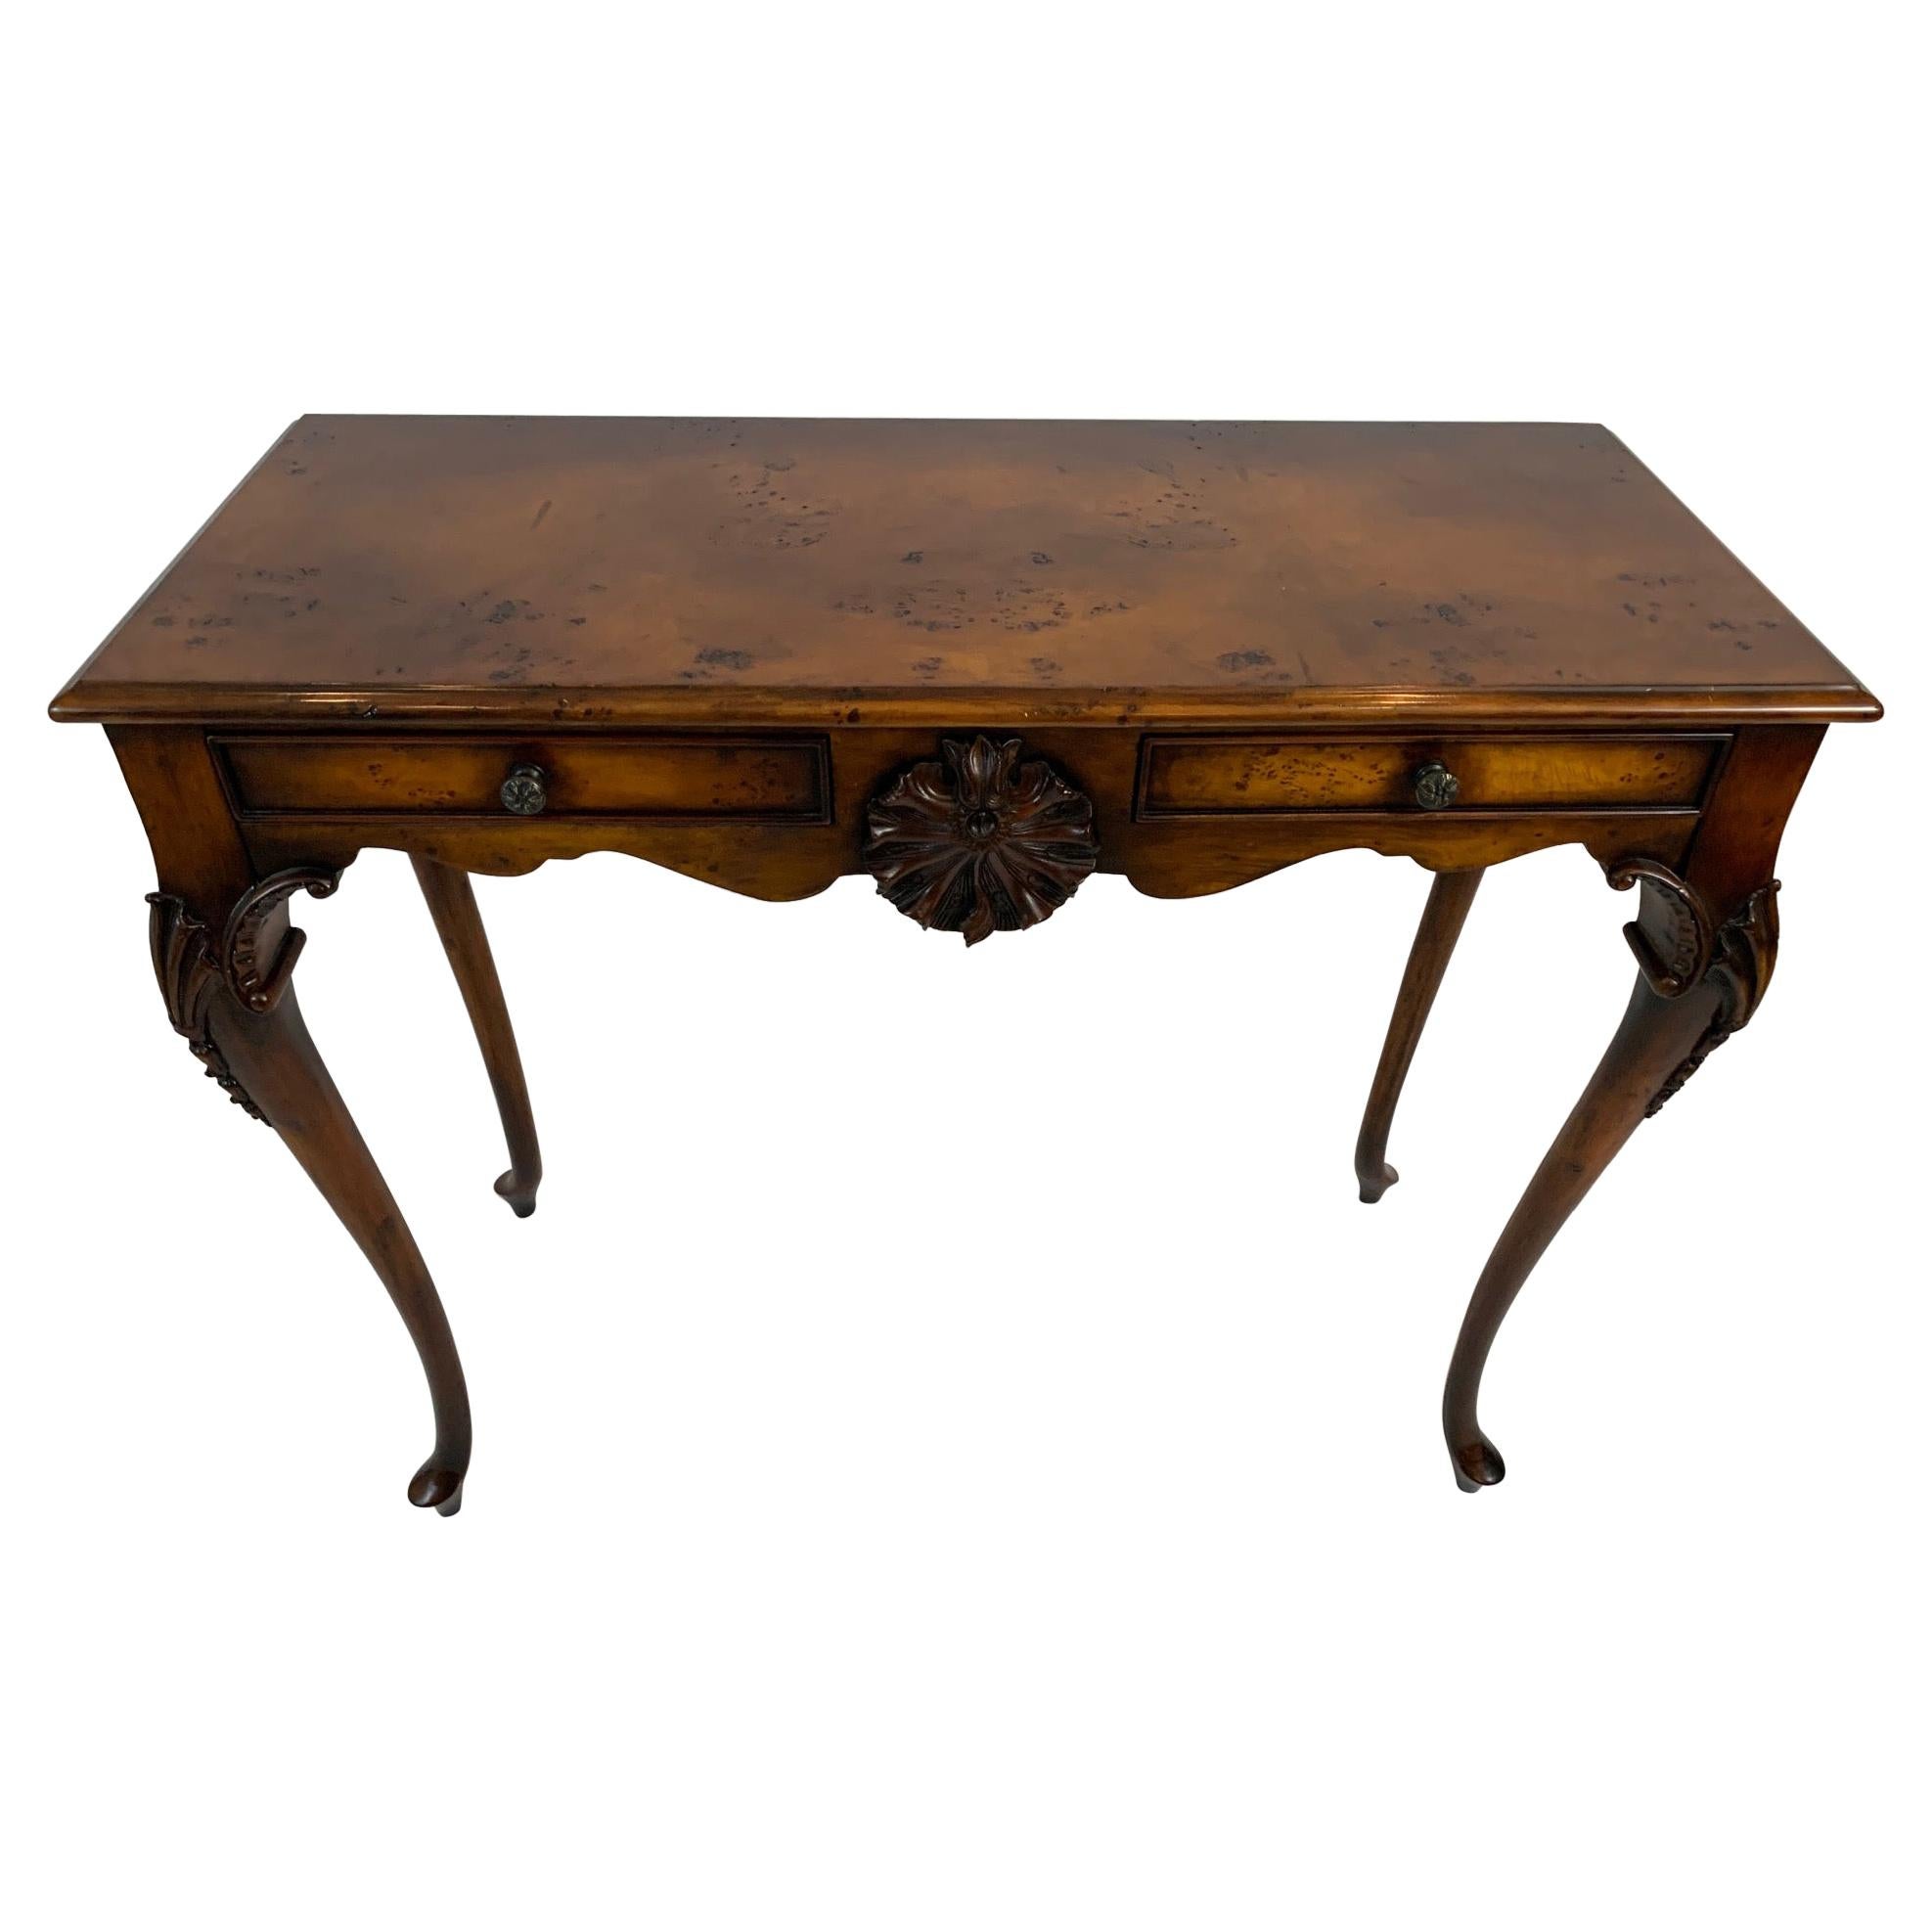 Handsome Burlwood Console Table with Two Drawers